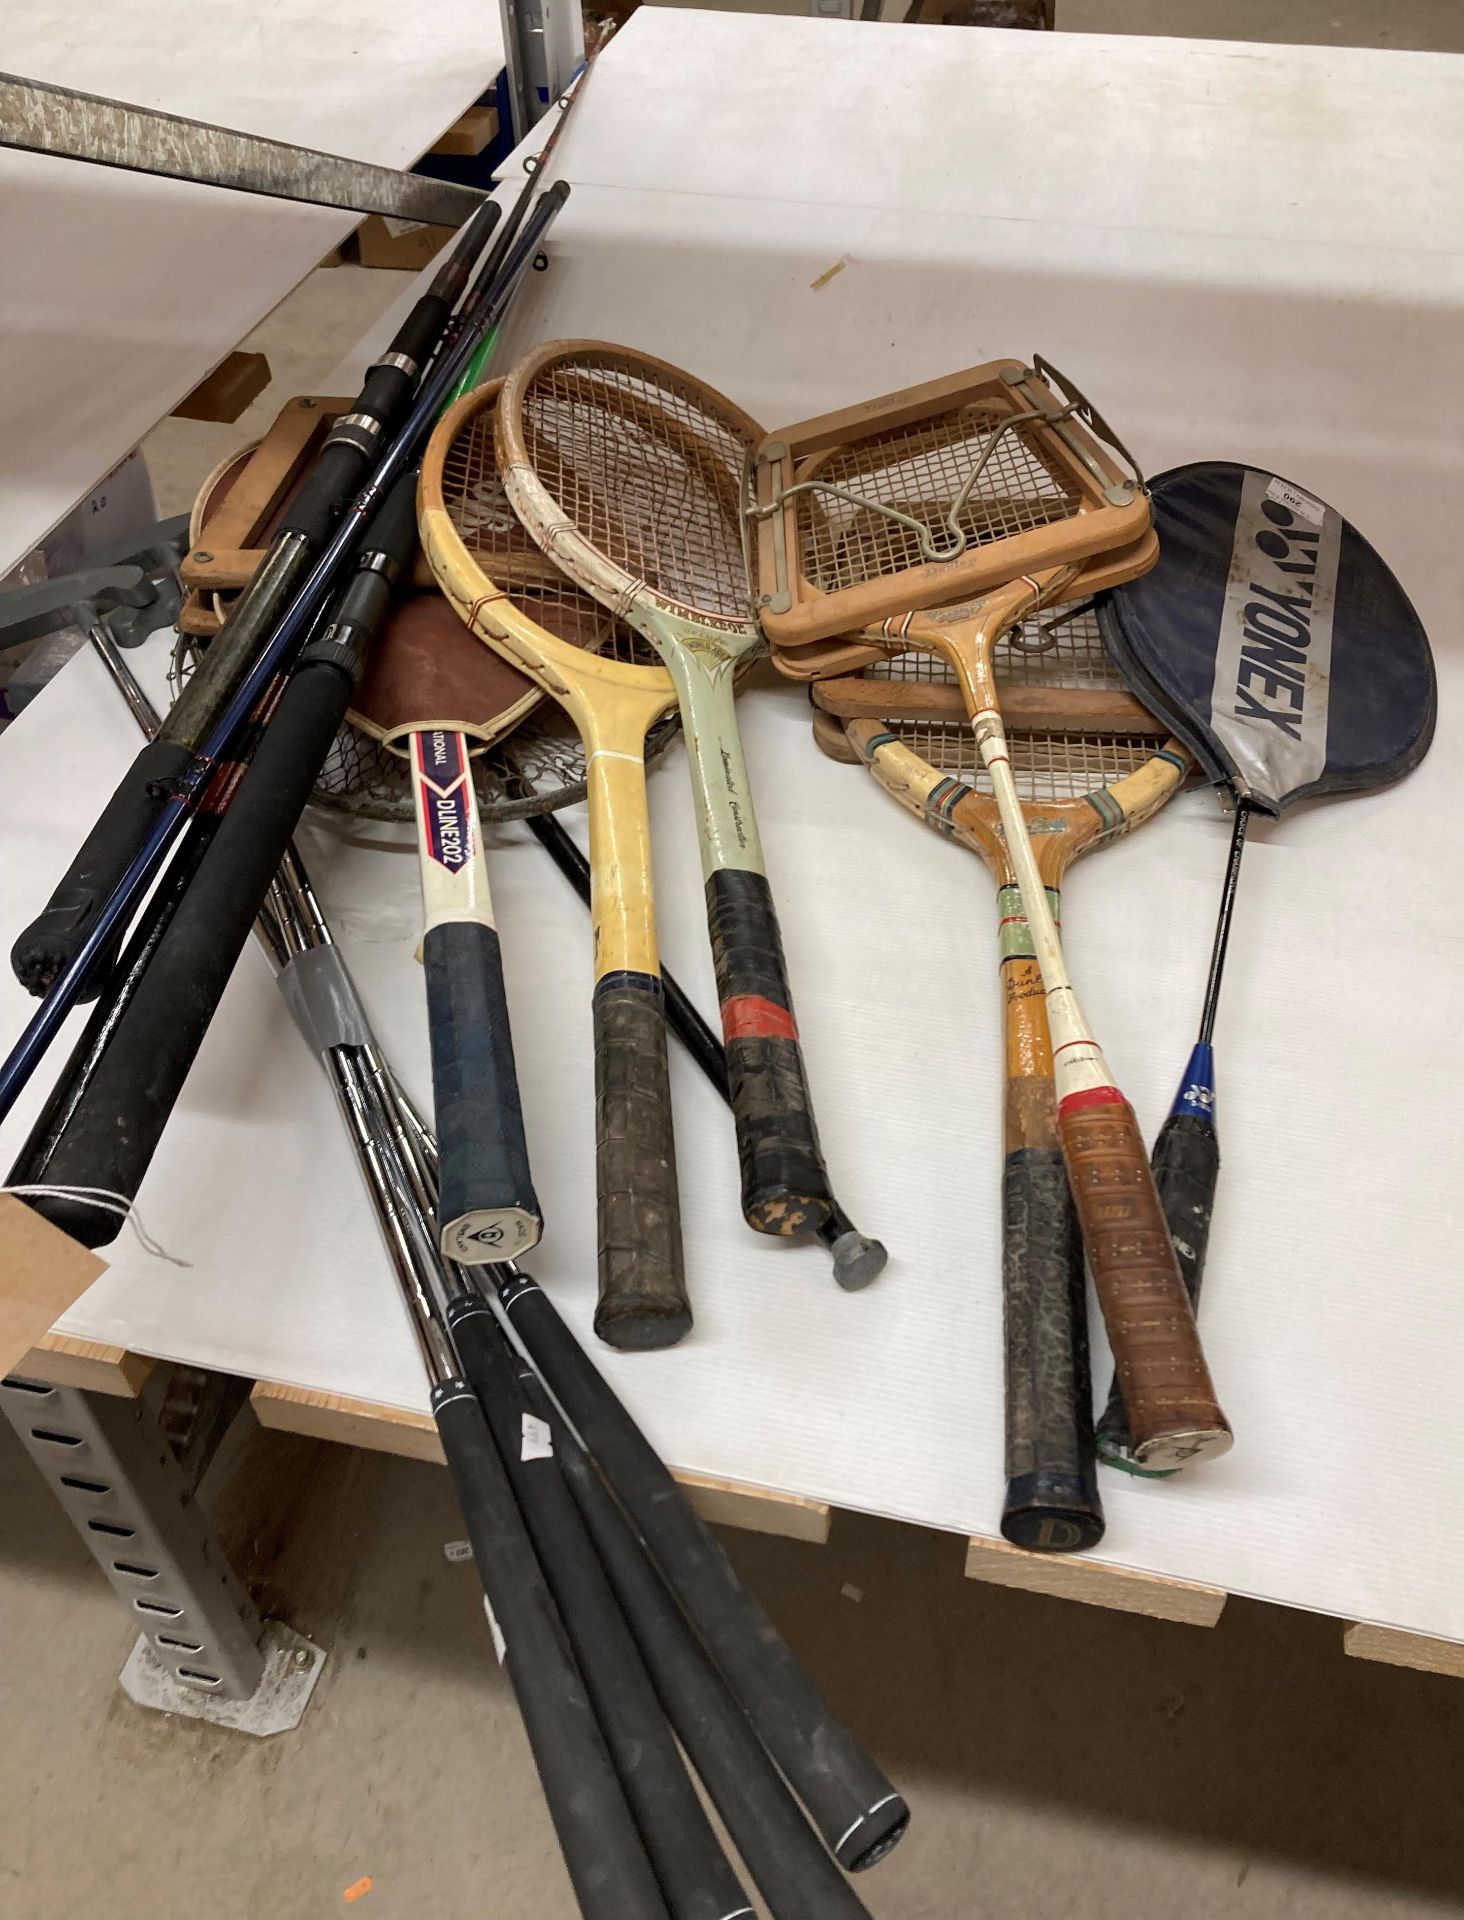 7 x tennis rackets, 4 x Golf putters and 2 x fishing rods,